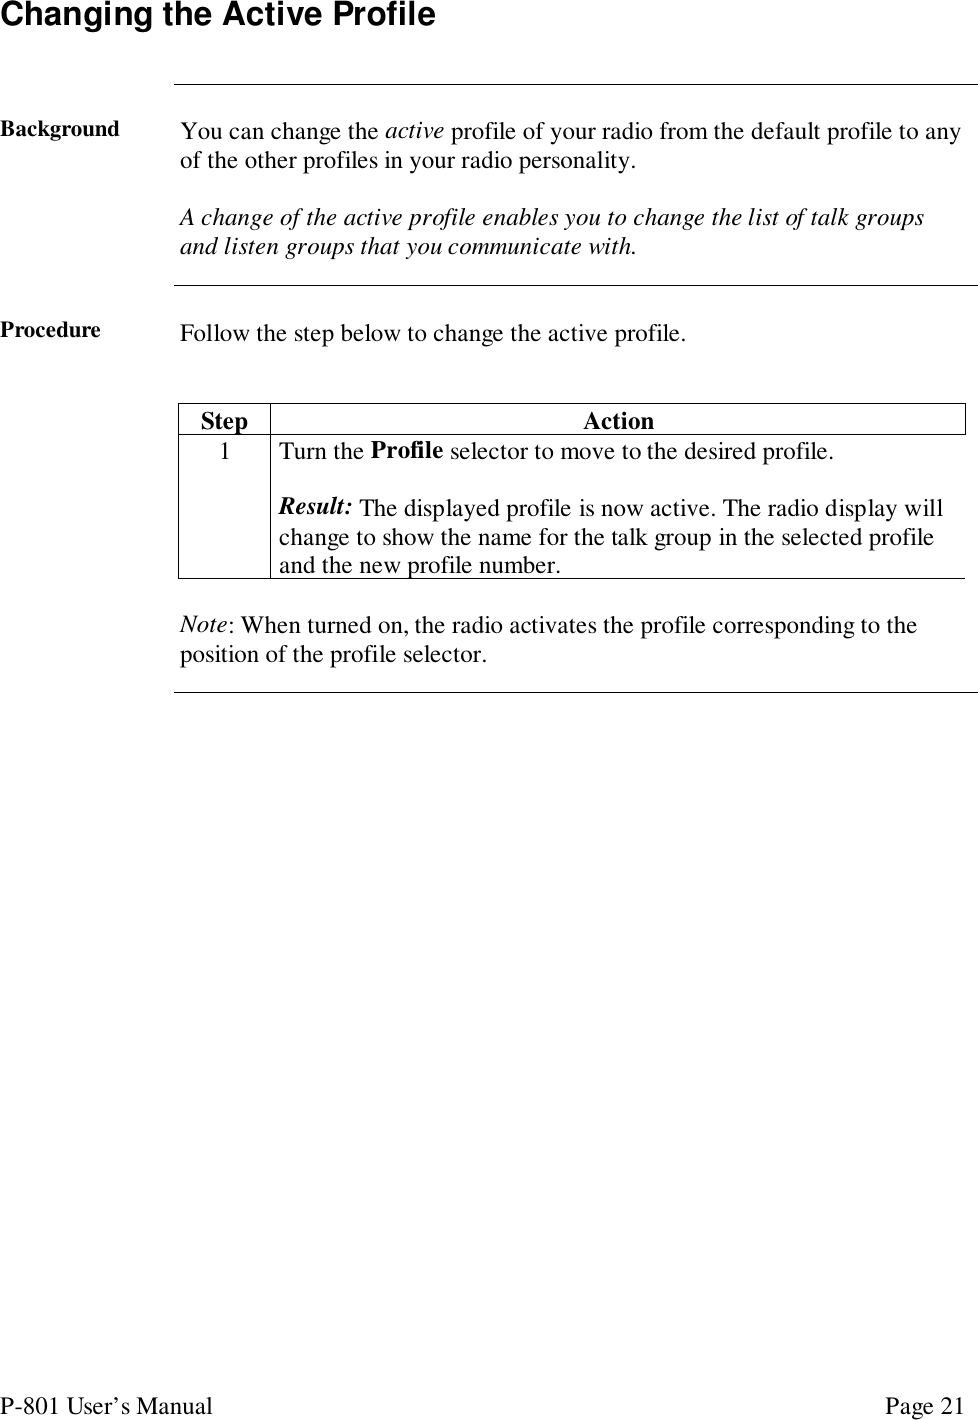 P-801 User’s Manual Page 21Changing the Active ProfileBackground You can change the active profile of your radio from the default profile to anyof the other profiles in your radio personality.A change of the active profile enables you to change the list of talk groupsand listen groups that you communicate with.Procedure Follow the step below to change the active profile.Step Action1 Turn the Profile selector to move to the desired profile.Result: The displayed profile is now active. The radio display willchange to show the name for the talk group in the selected profileand the new profile number.Note: When turned on, the radio activates the profile corresponding to theposition of the profile selector.